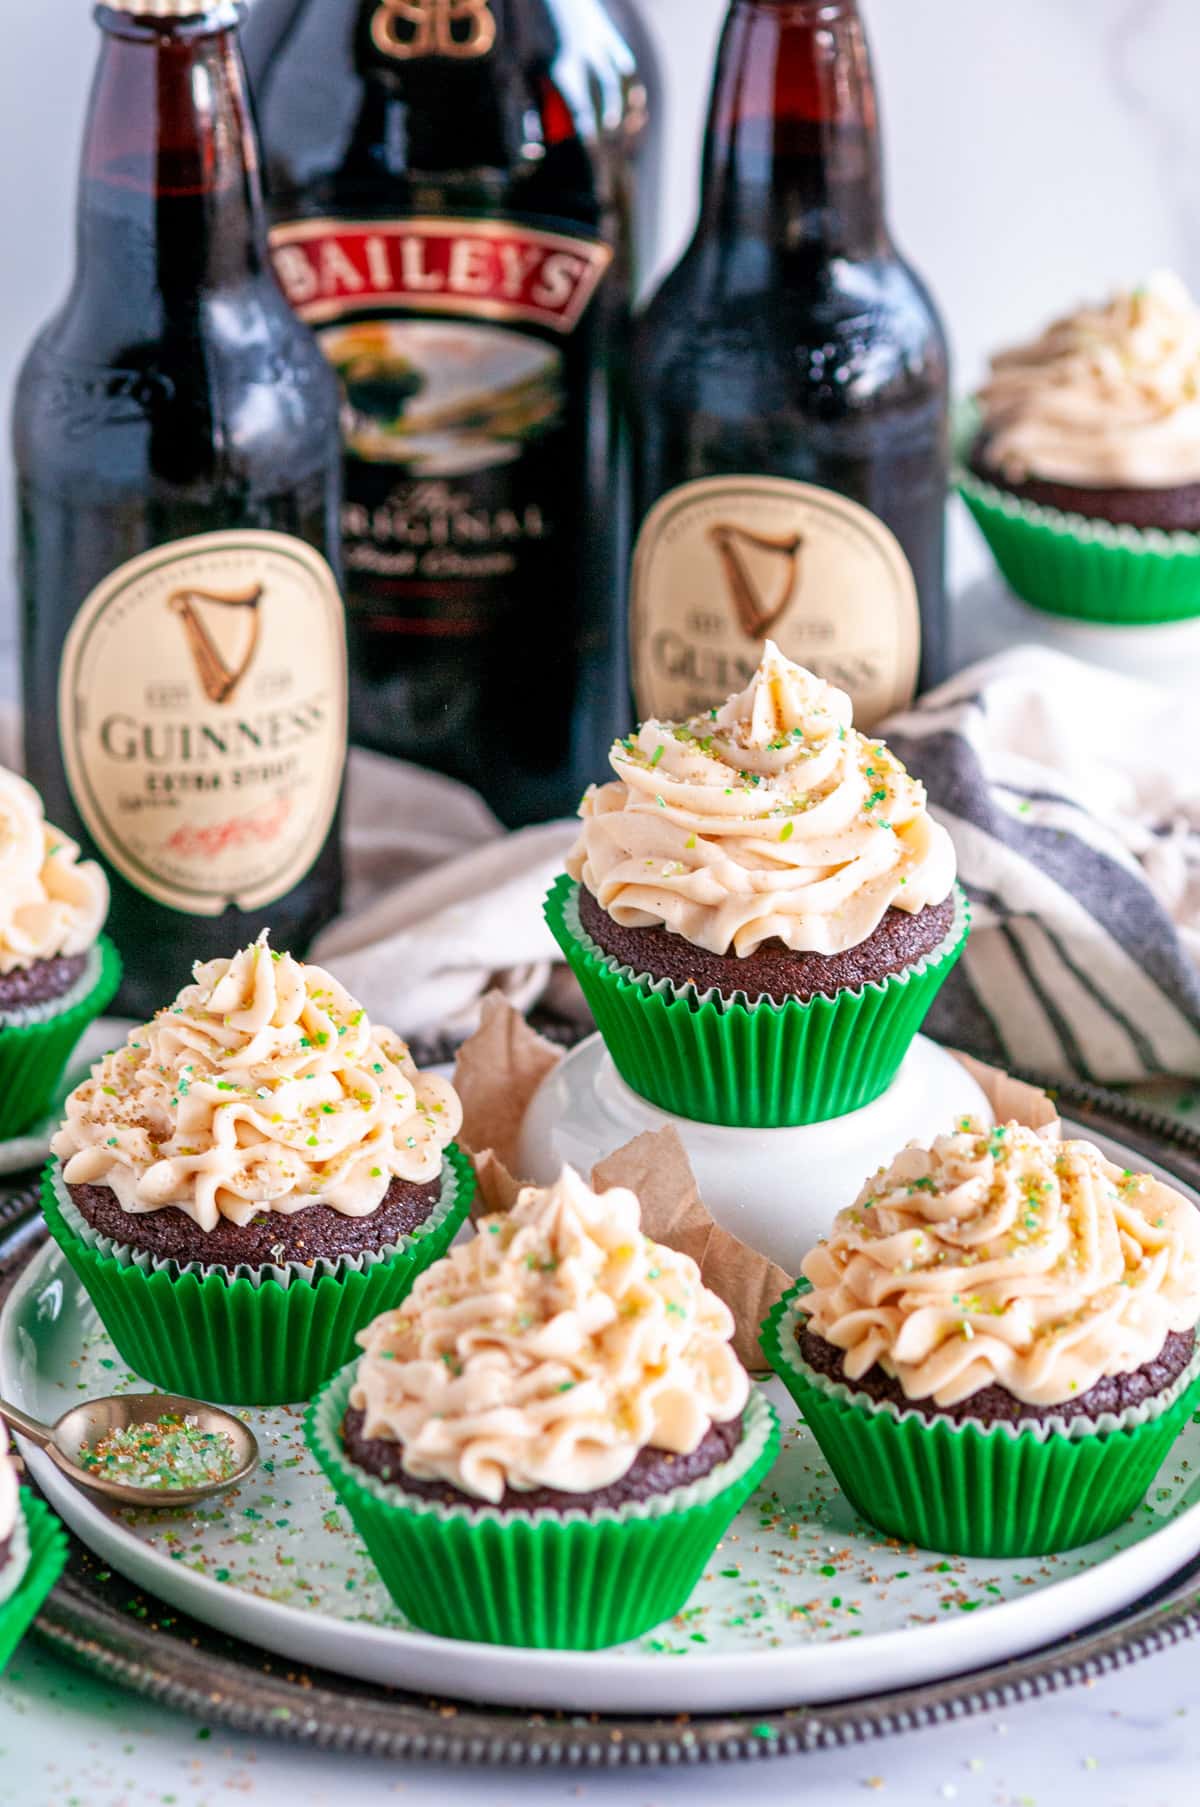 Guinness Chocolate Cupcakes with Bailey's Buttercream Frosting in green liners topped with sanding sugar on white and gray plates